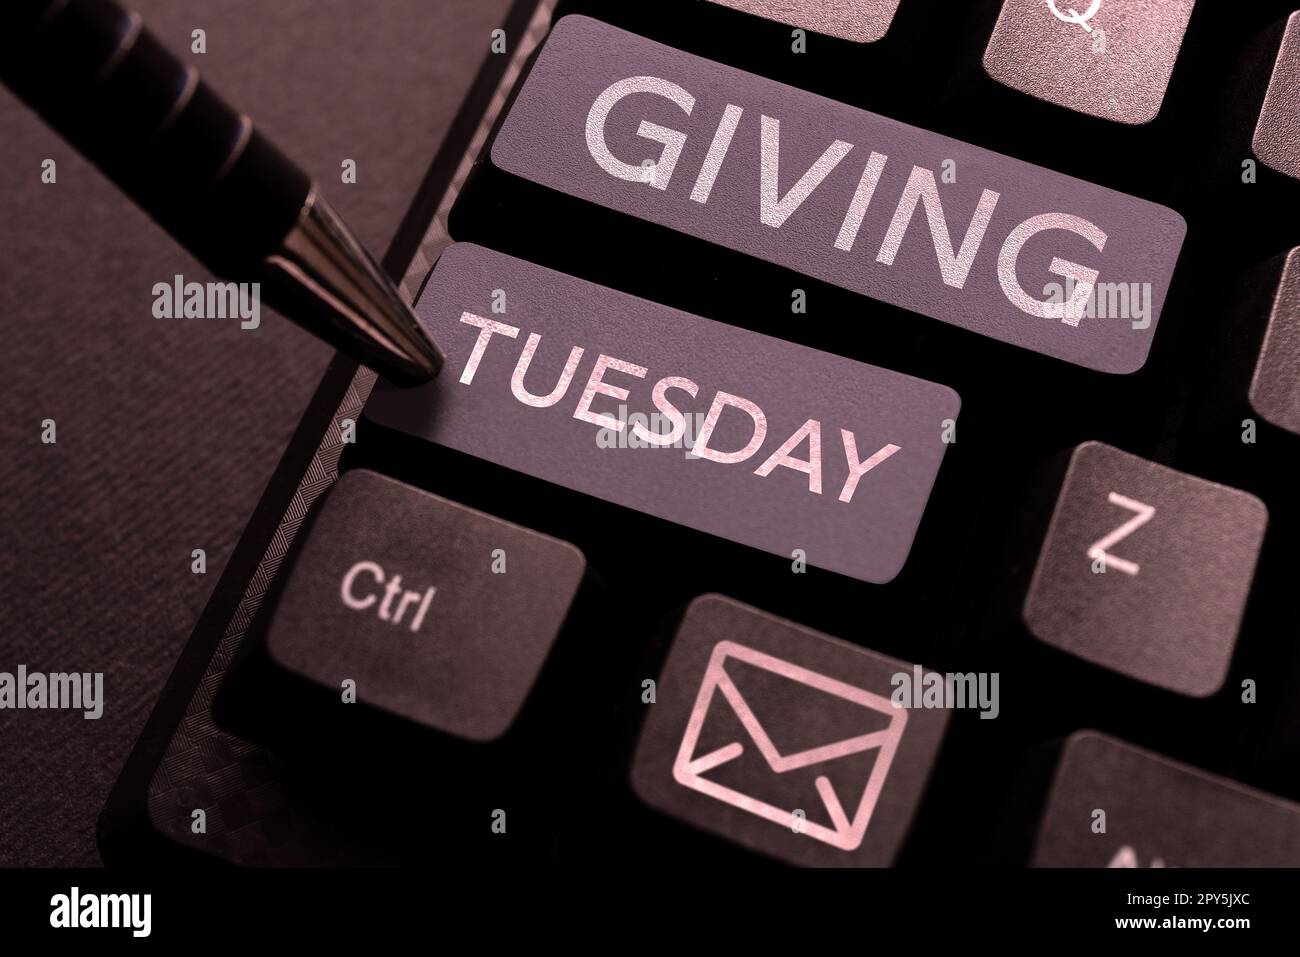 Writing displaying text Giving Tuesday. Business concept international day of charitable giving Hashtag activism Stock Photo